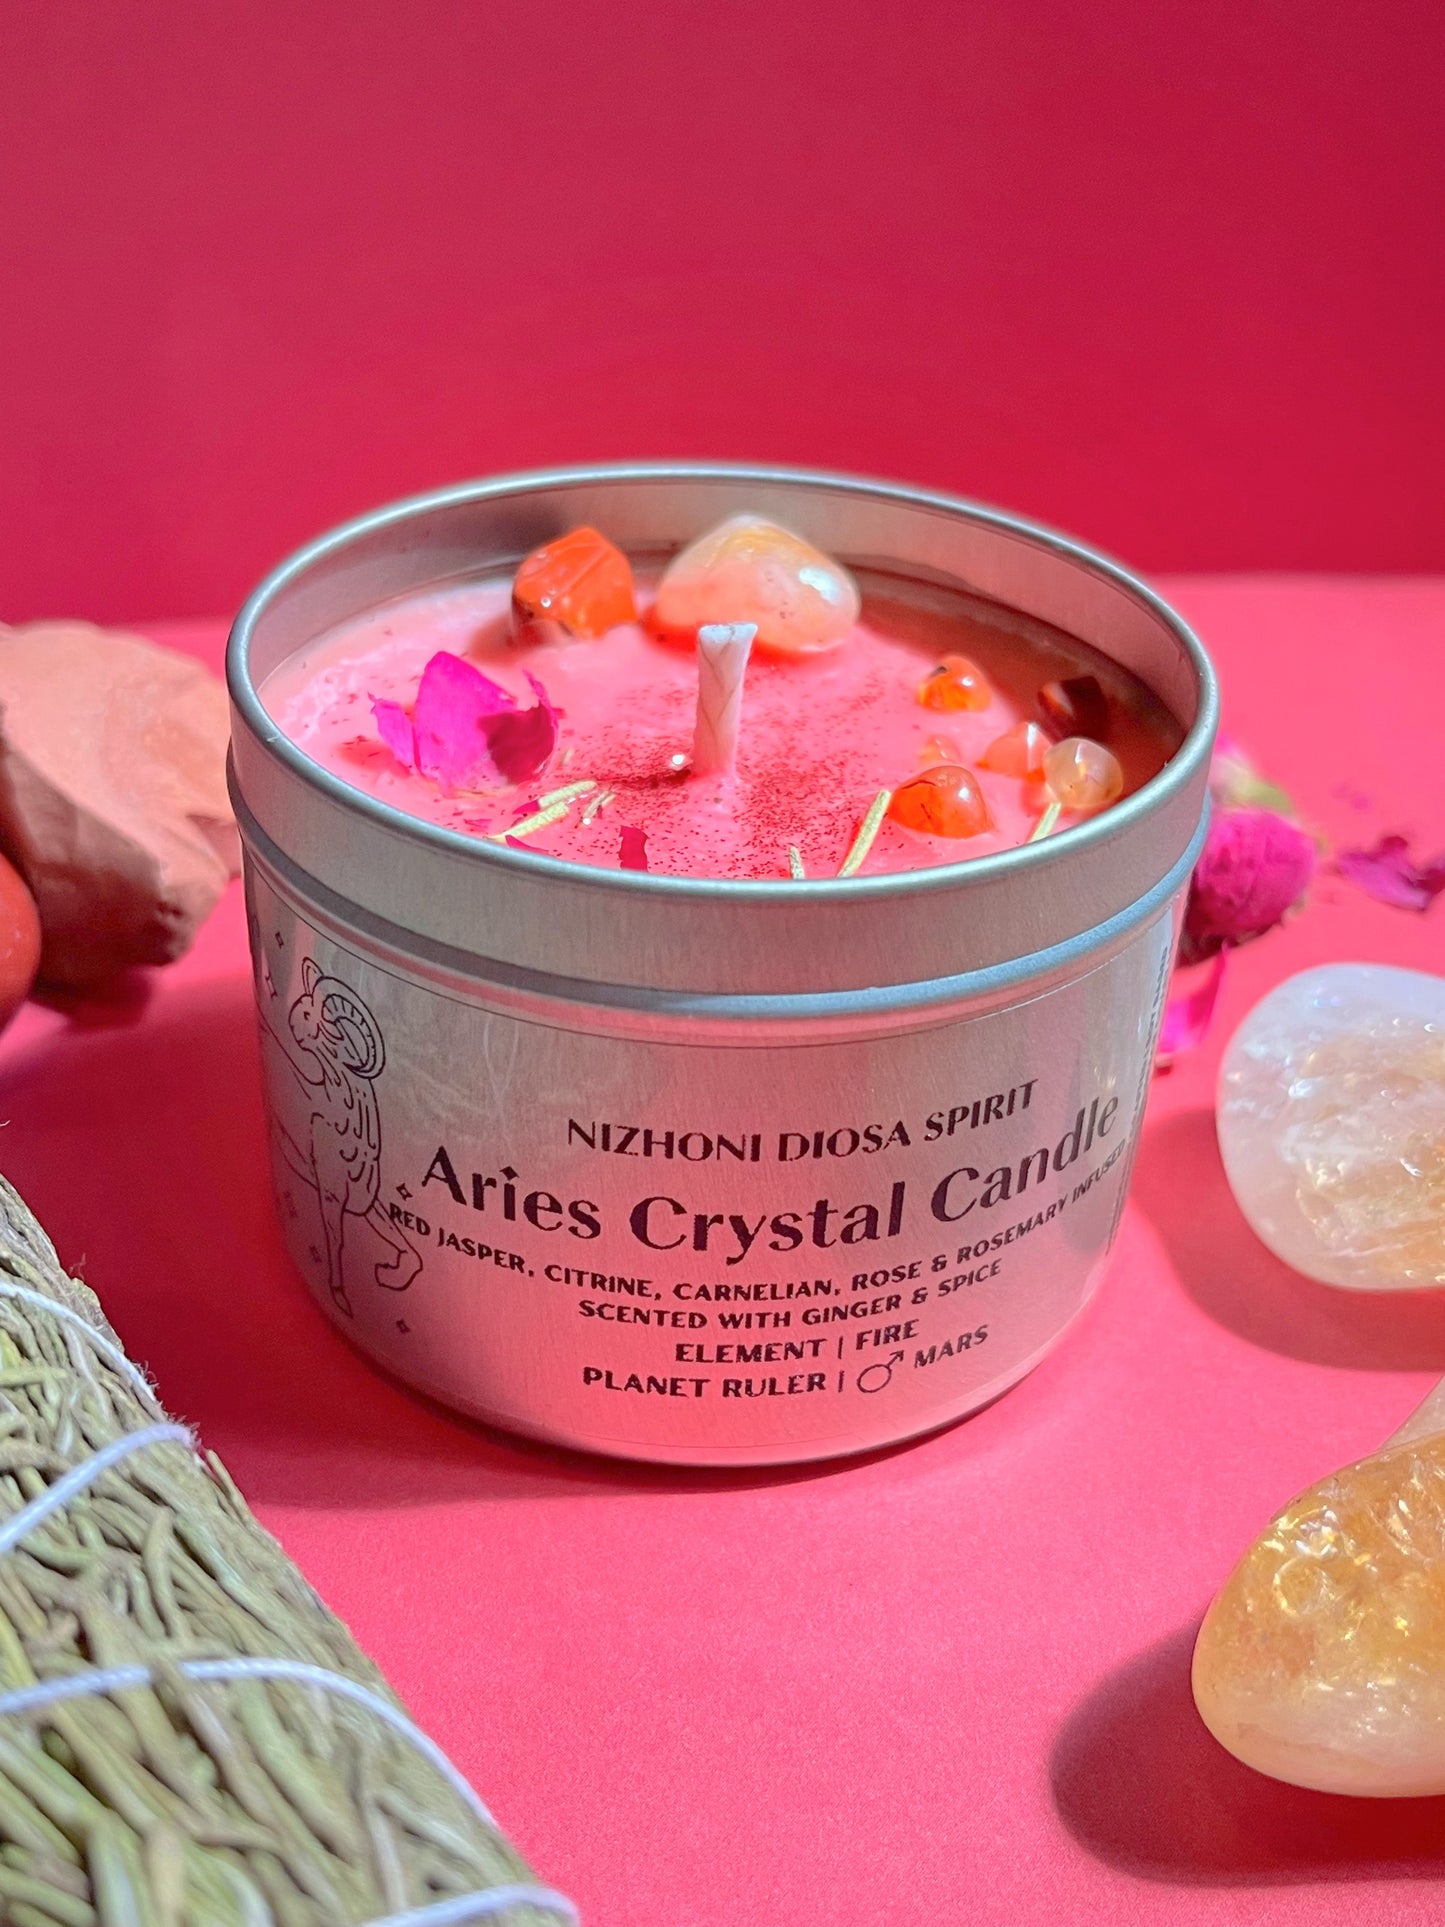 Aries Crystal Candle